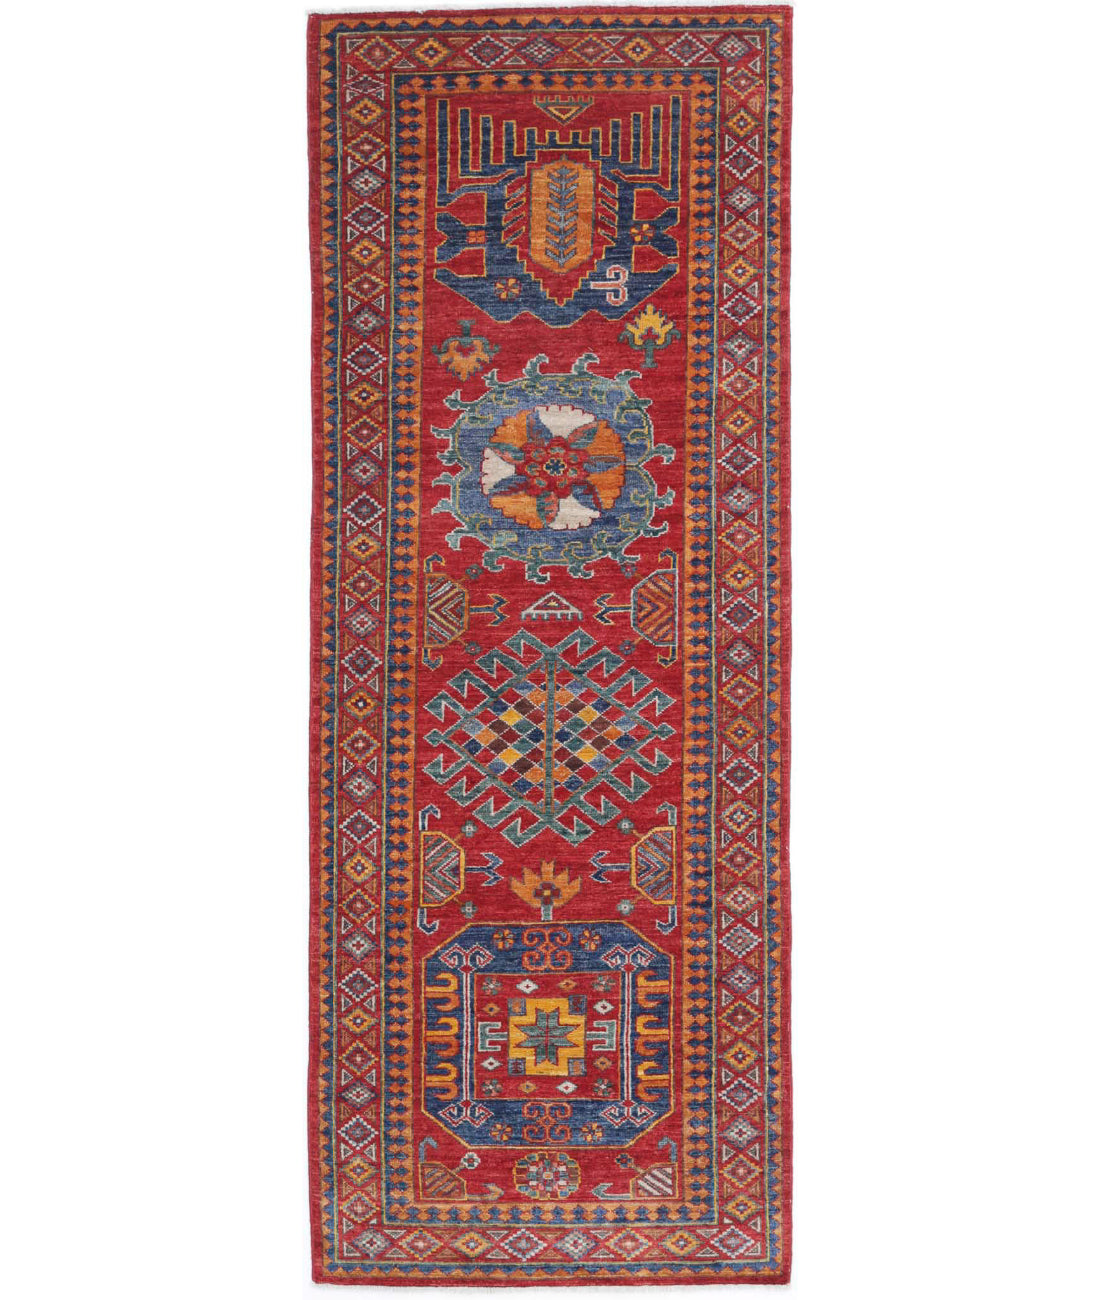 Hand Knotted Nomadic Caucasian Humna Wool Rug - 2&#39;8&#39;&#39; x 7&#39;10&#39;&#39; 2&#39;8&#39;&#39; x 7&#39;10&#39;&#39; (80 X 235) / Red / Gold